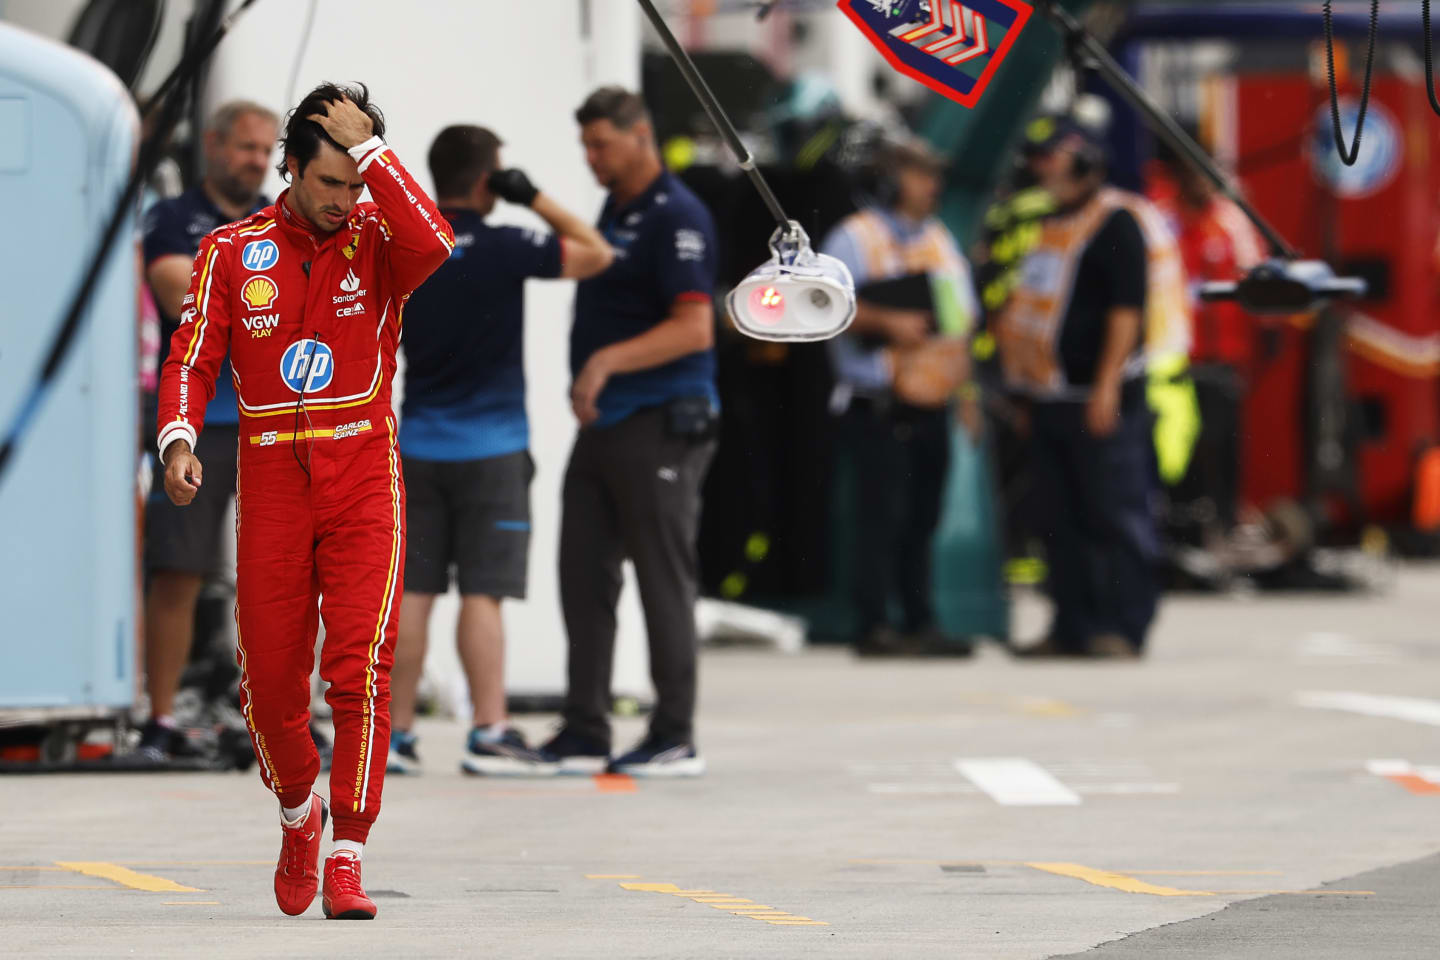 MONTREAL, QUEBEC - JUNE 08: 12th placed qualifier Carlos Sainz of Spain and Ferrari walks in the Pitlane during qualifying ahead of the F1 Grand Prix of Canada at Circuit Gilles Villeneuve on June 08, 2024 in Montreal, Quebec. (Photo by Chris Graythen/Getty Images)